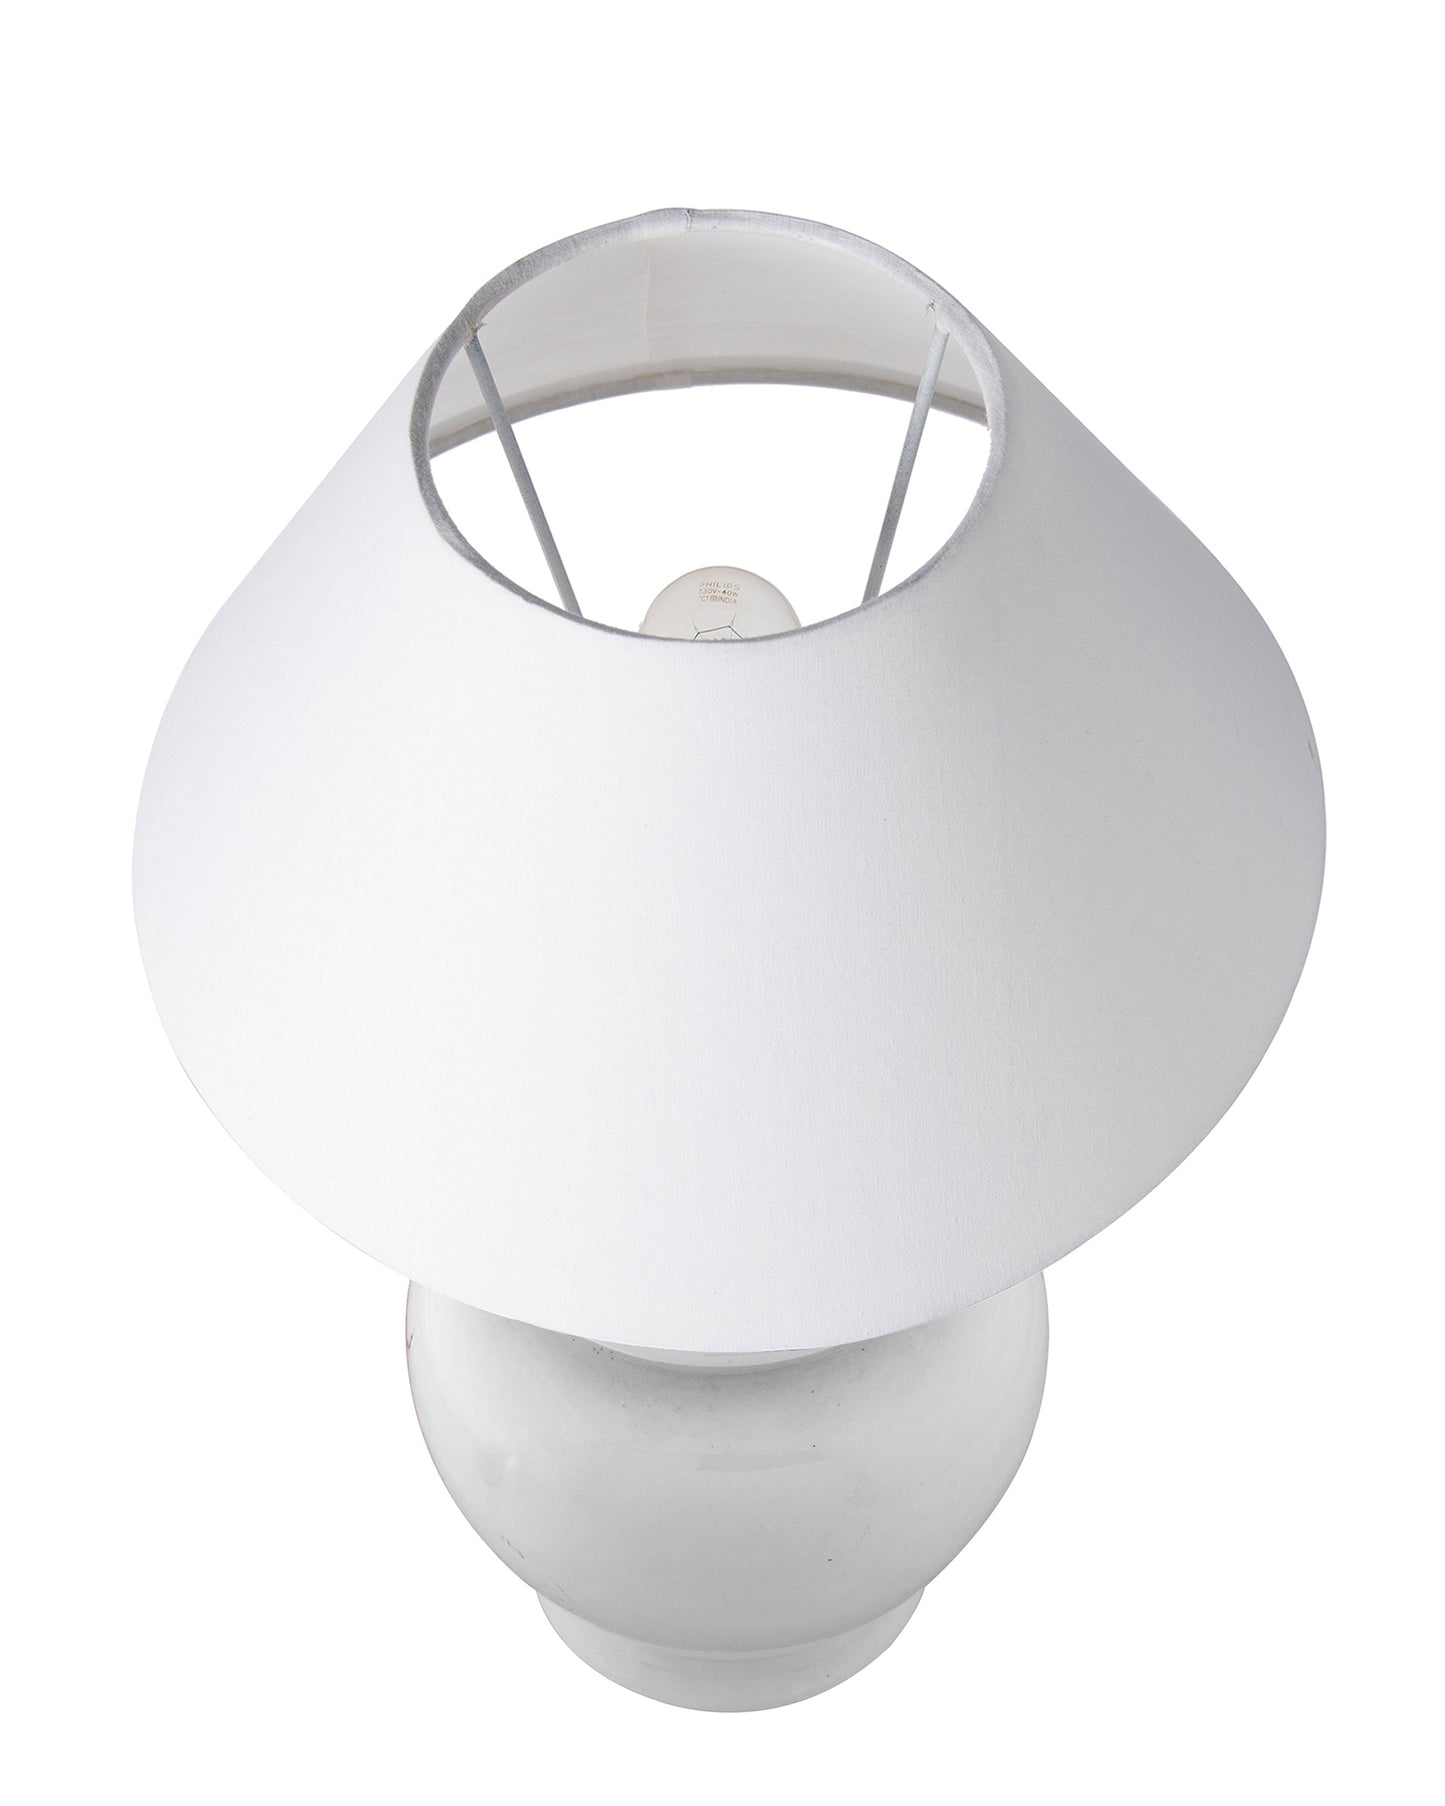 White Glossy Ceramic Pot Shaped Base Table Lamp with White Cone Shade E-27 Bulb